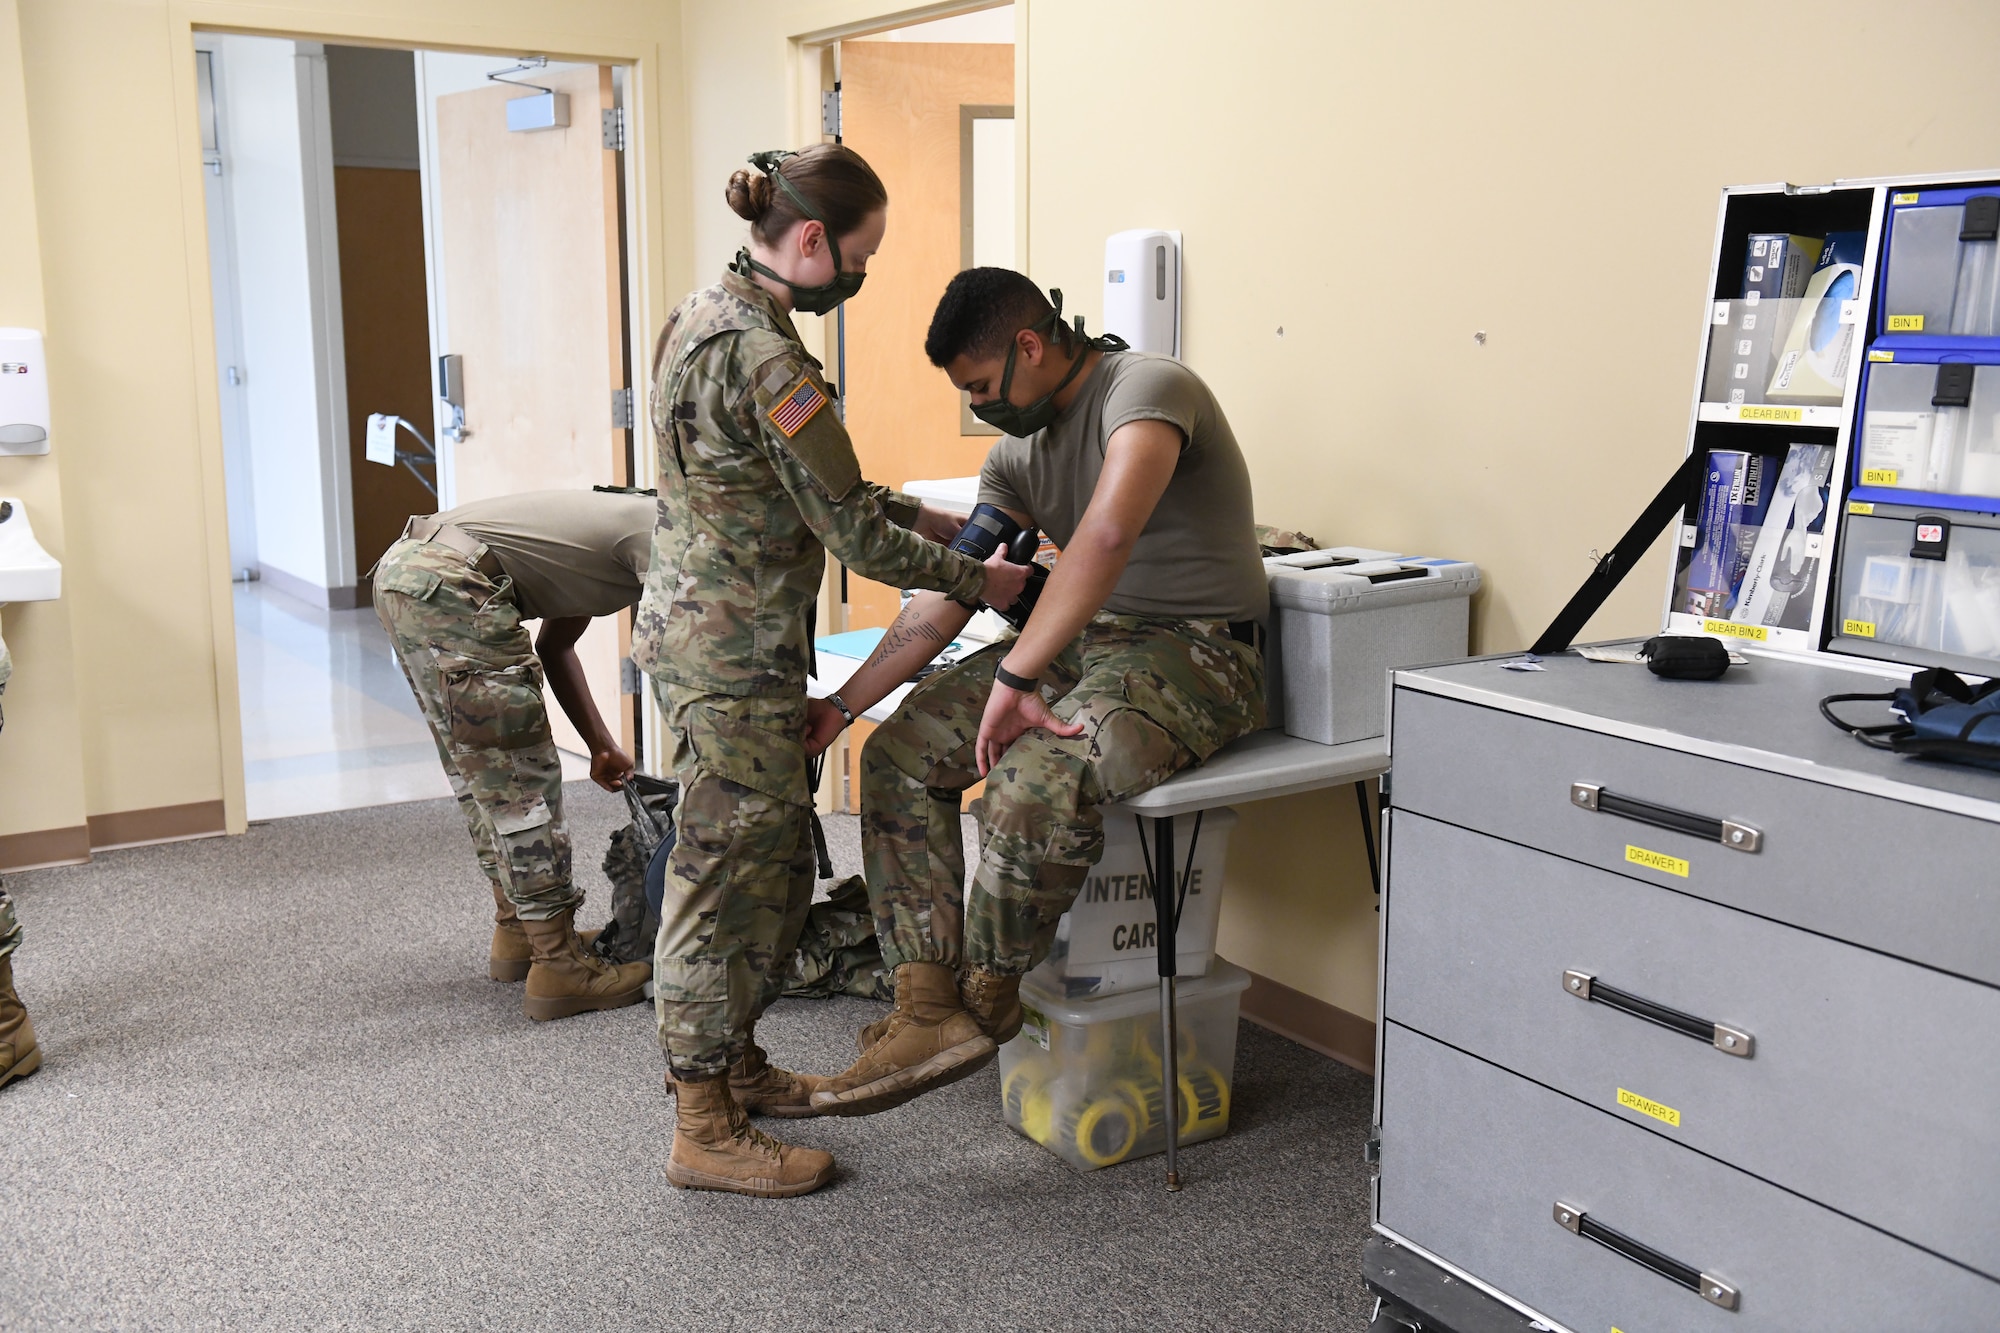 North Carolina Army and Air National Guard medical technicians practice working with a blood pressure monitor, while conducting drills prior to the arrival of live patients, at the North Carolina National Guard Medical Support Shelter (MSS), Central North Carolina, April 30, 2020. The MSS is intended to act as an overflow shelter for hospital patients not infected with the COVID-19 virus and is maned by a joint task force of Army and Airforce National Guard medical staff.